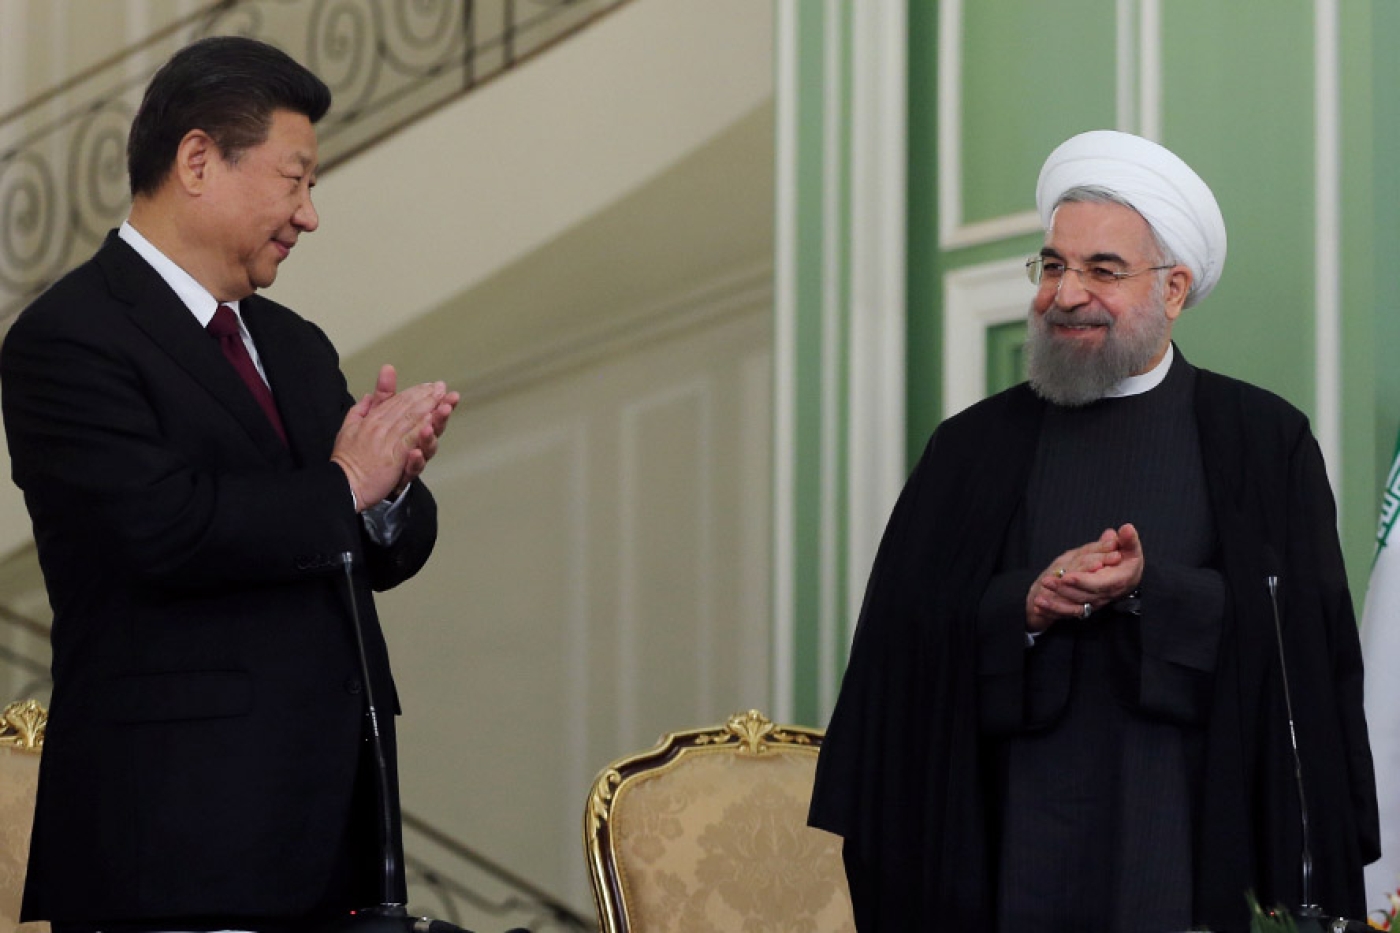 Iranian President Hassan Rouhani and his Chinese counterpart Xi Xinping meet during a joint press conference in Tehran in 2016.